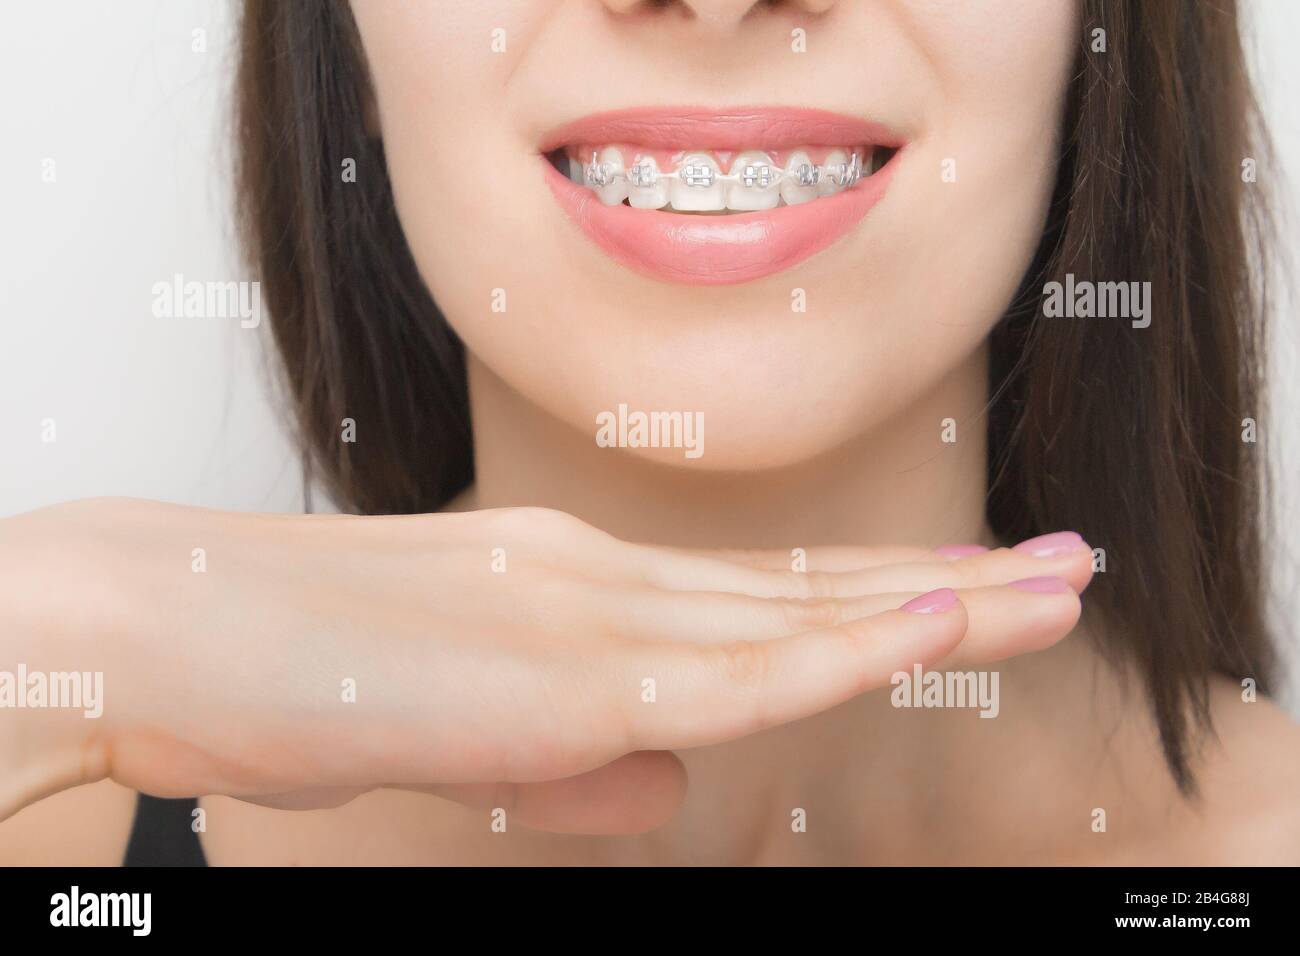 Showing White Teeth With Braces Stock Photo By ©didesign, 43% OFF